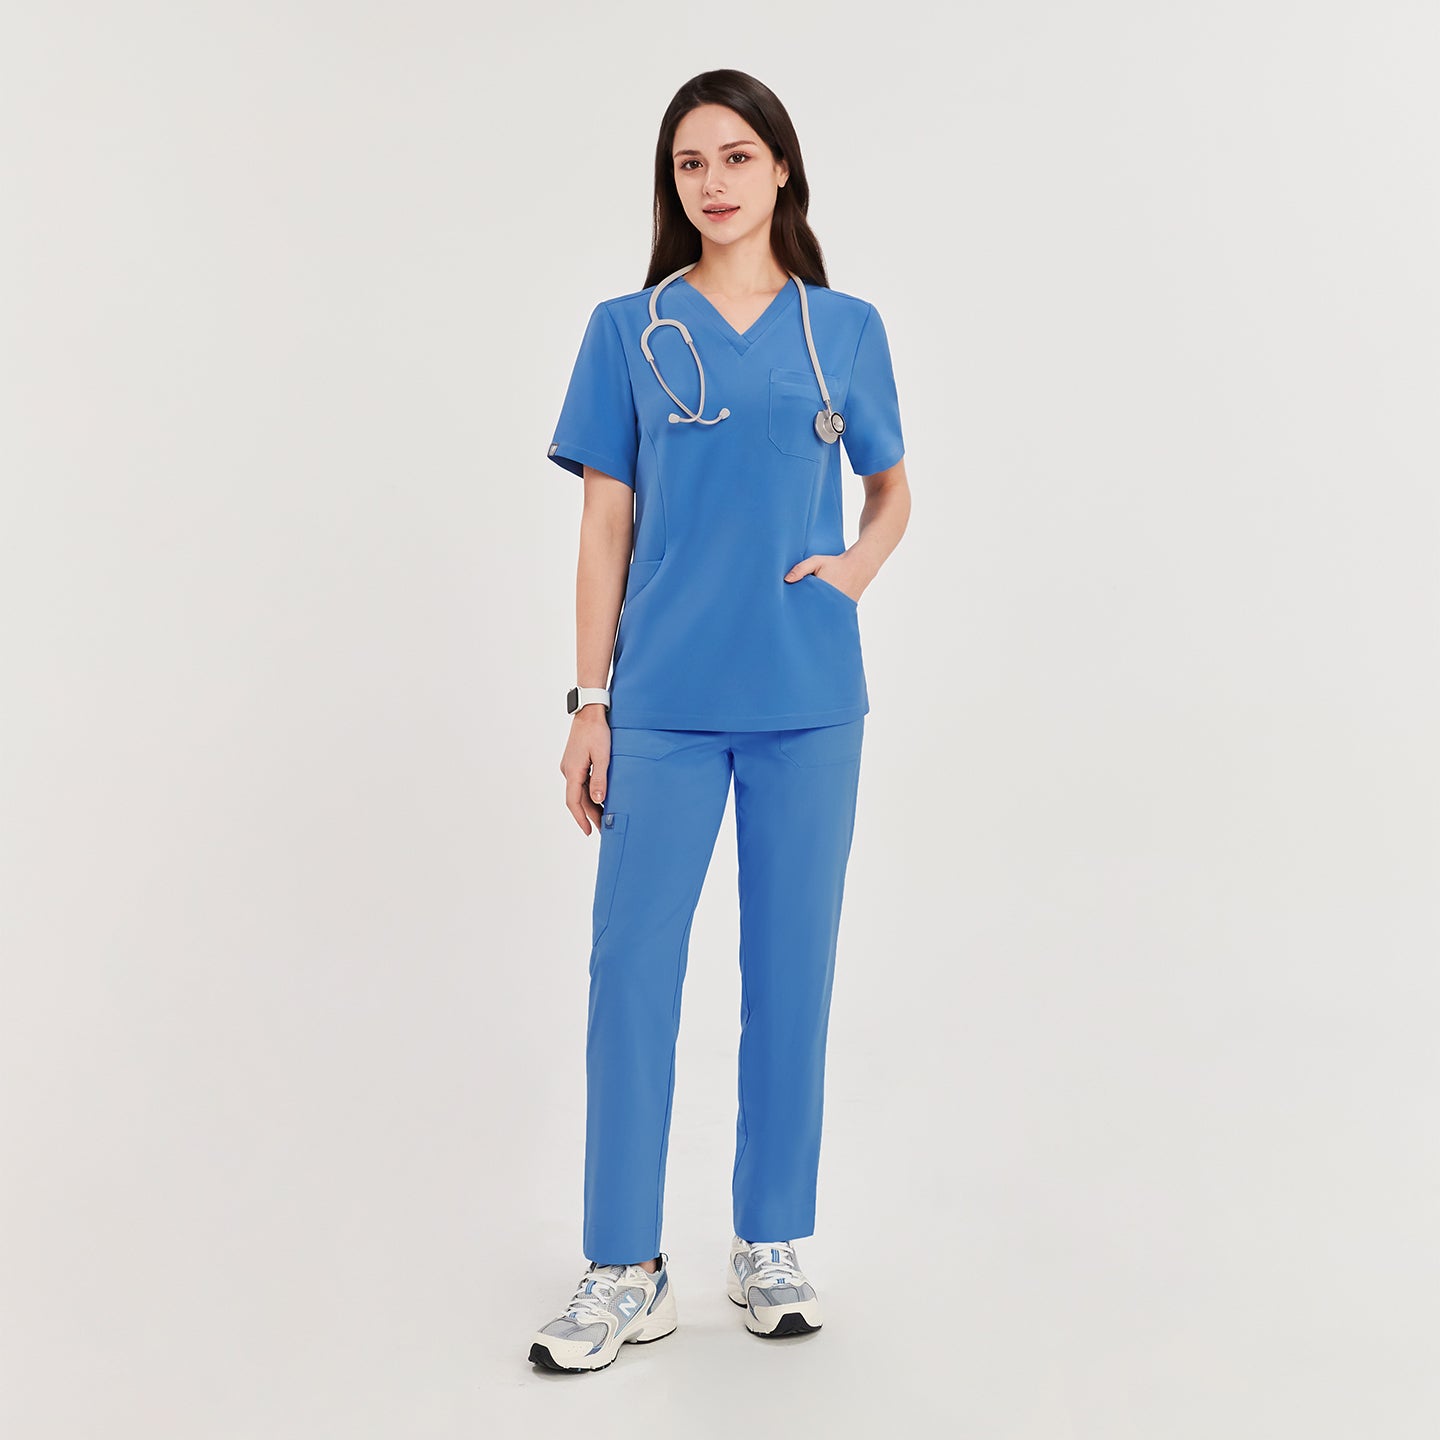  Woman in sky blue zipper slit scrub pants and matching top, standing with a stethoscope around her neck, showcasing the full outfit,Sky Blue